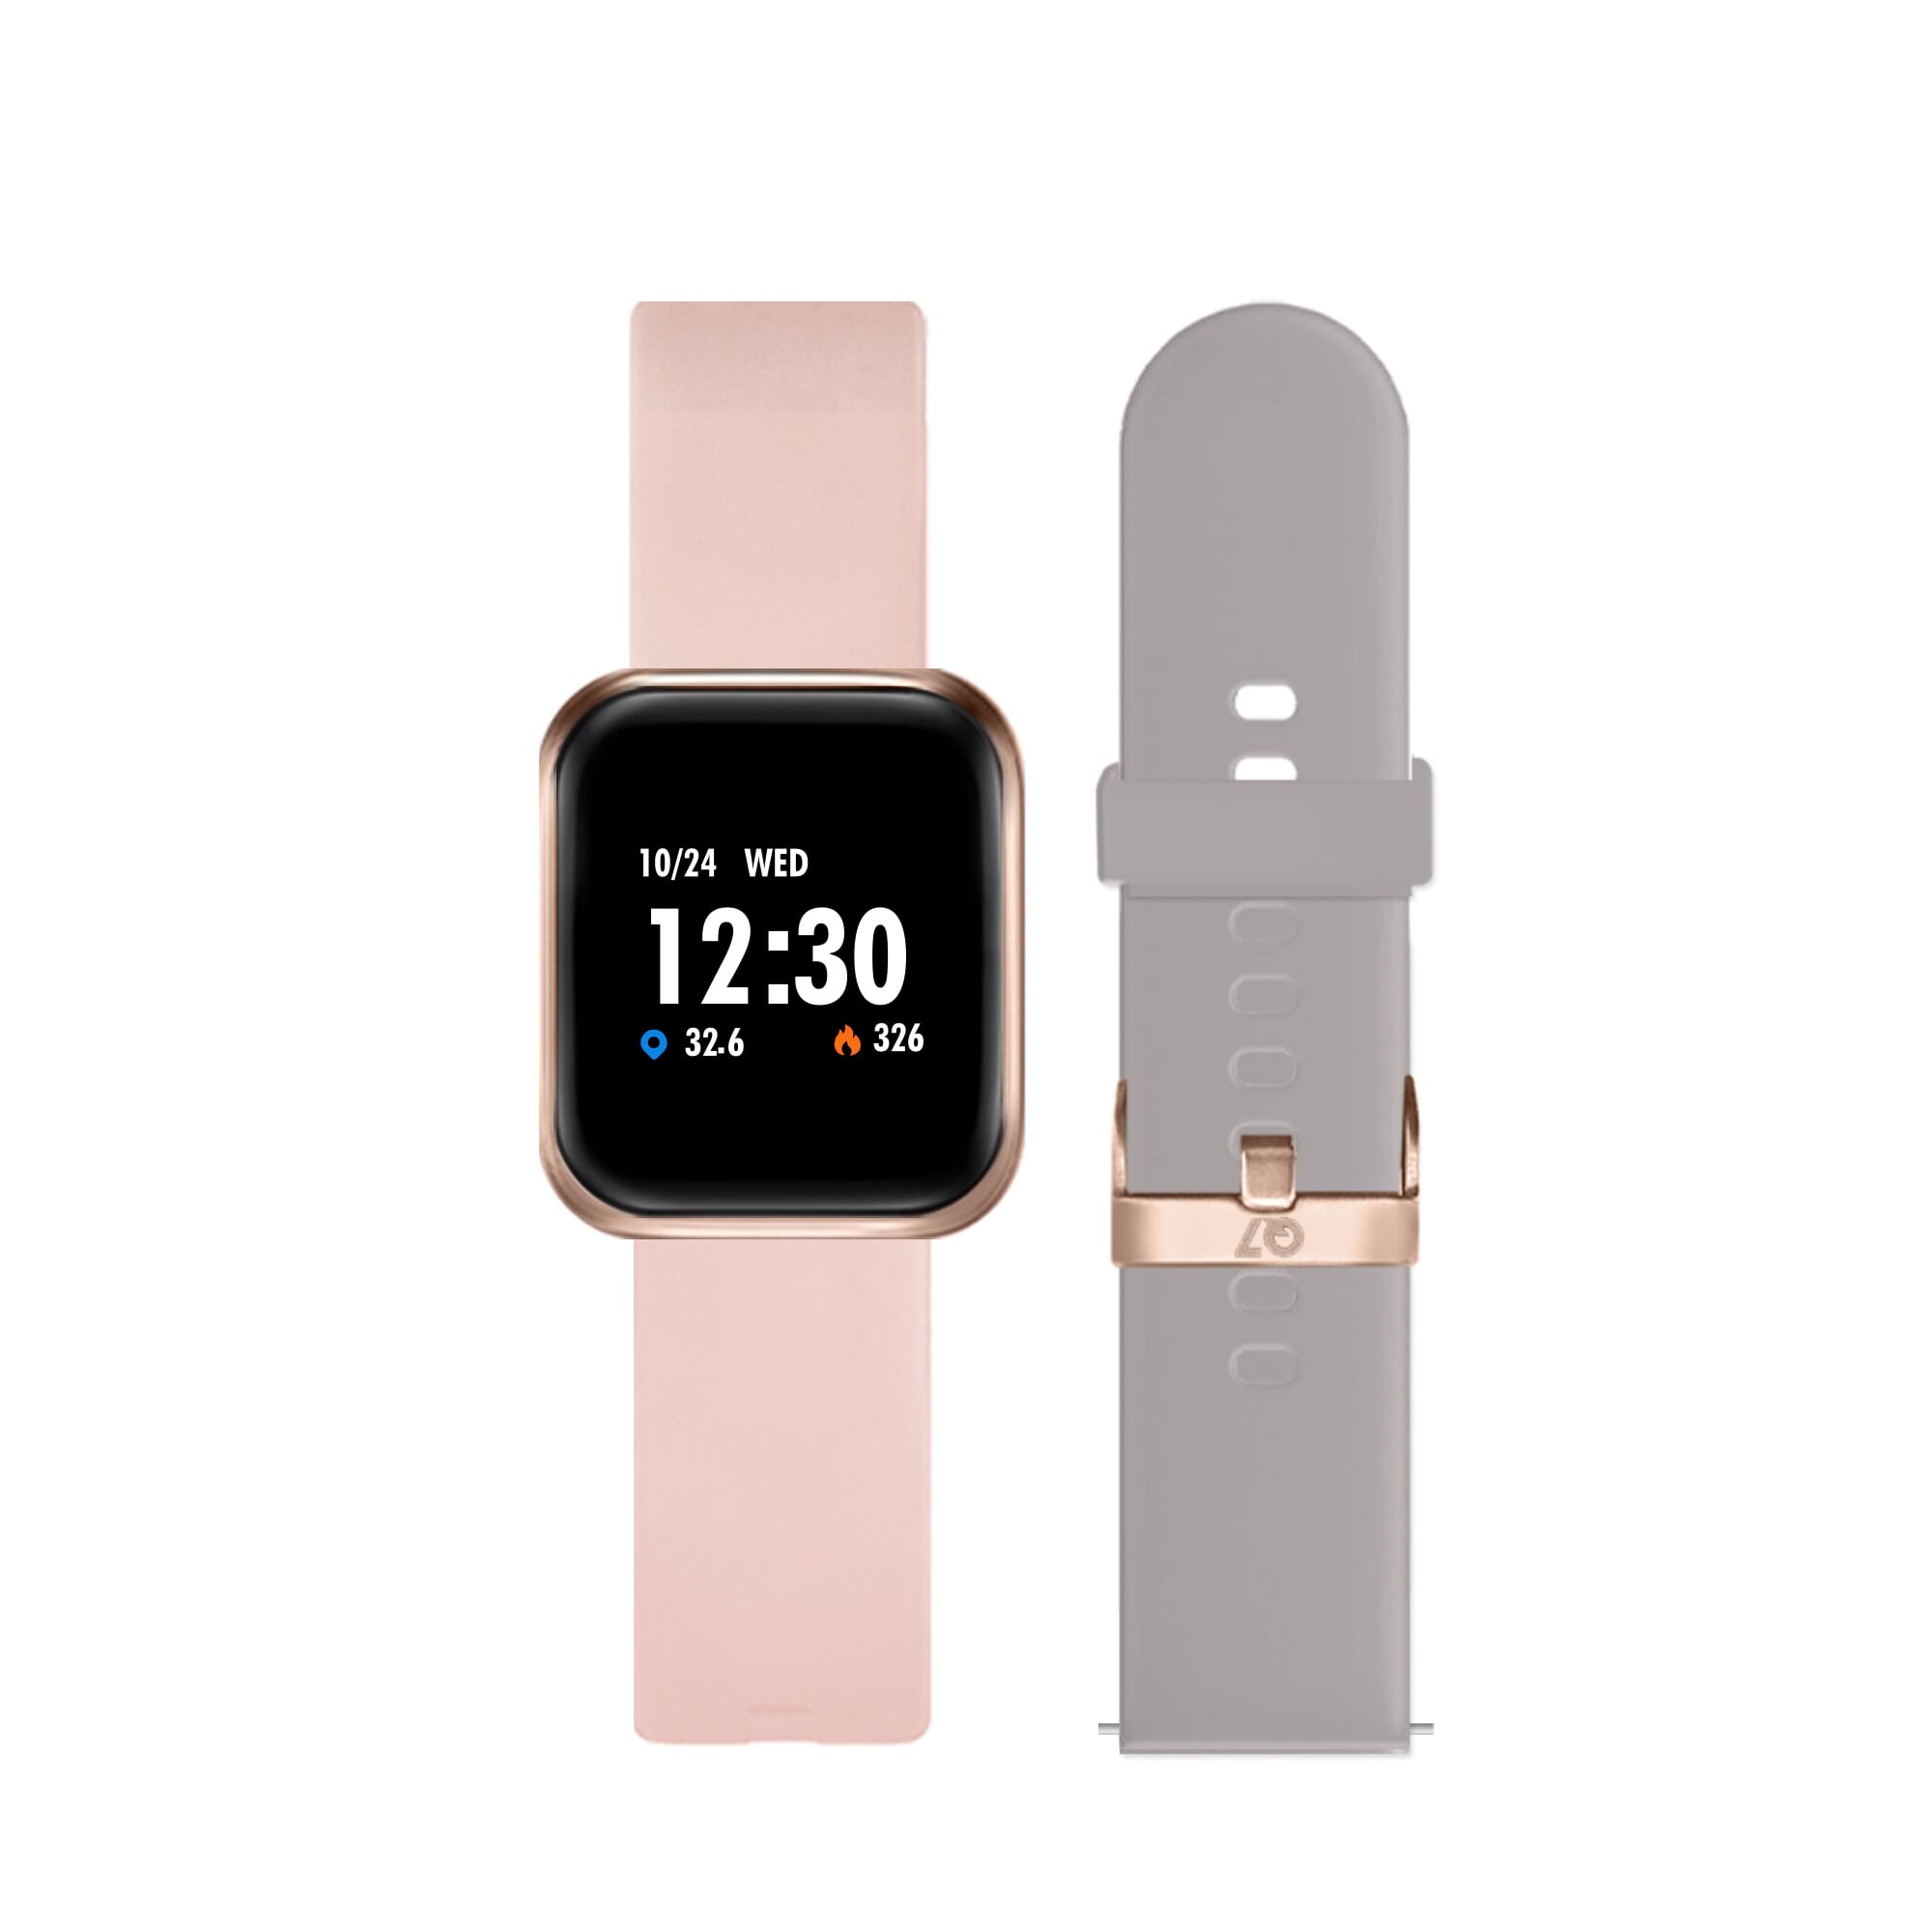 Q7 Smartwatch Fitness with Interchangeable Straps Compatible w iOS & Android (Blush/Grey) - Walmart.com